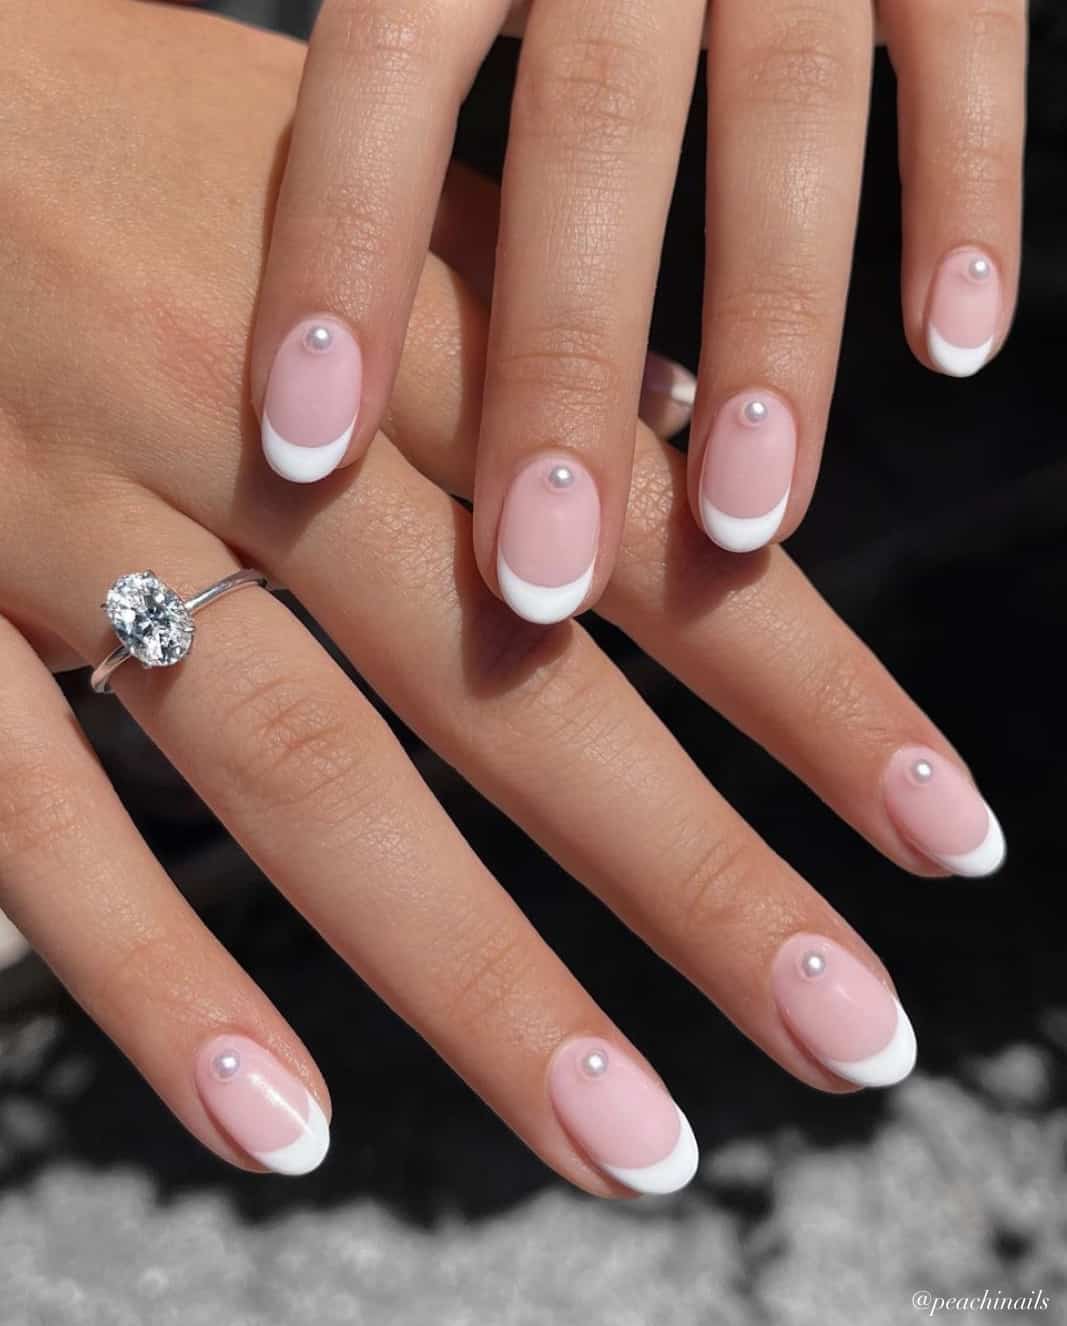 A hand with short round nails painted with white French tips and accented with a pearl bead along the cuticles